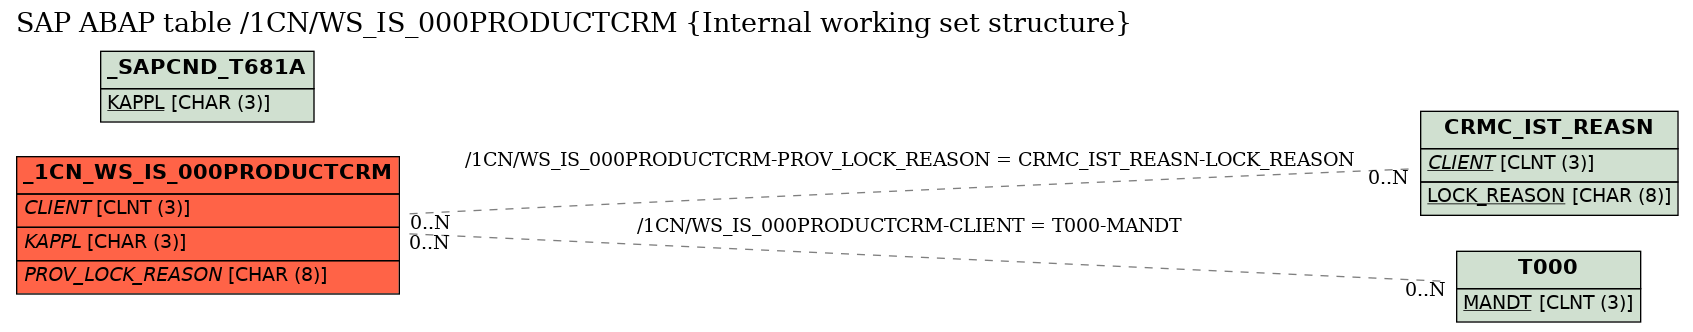 E-R Diagram for table /1CN/WS_IS_000PRODUCTCRM (Internal working set structure)